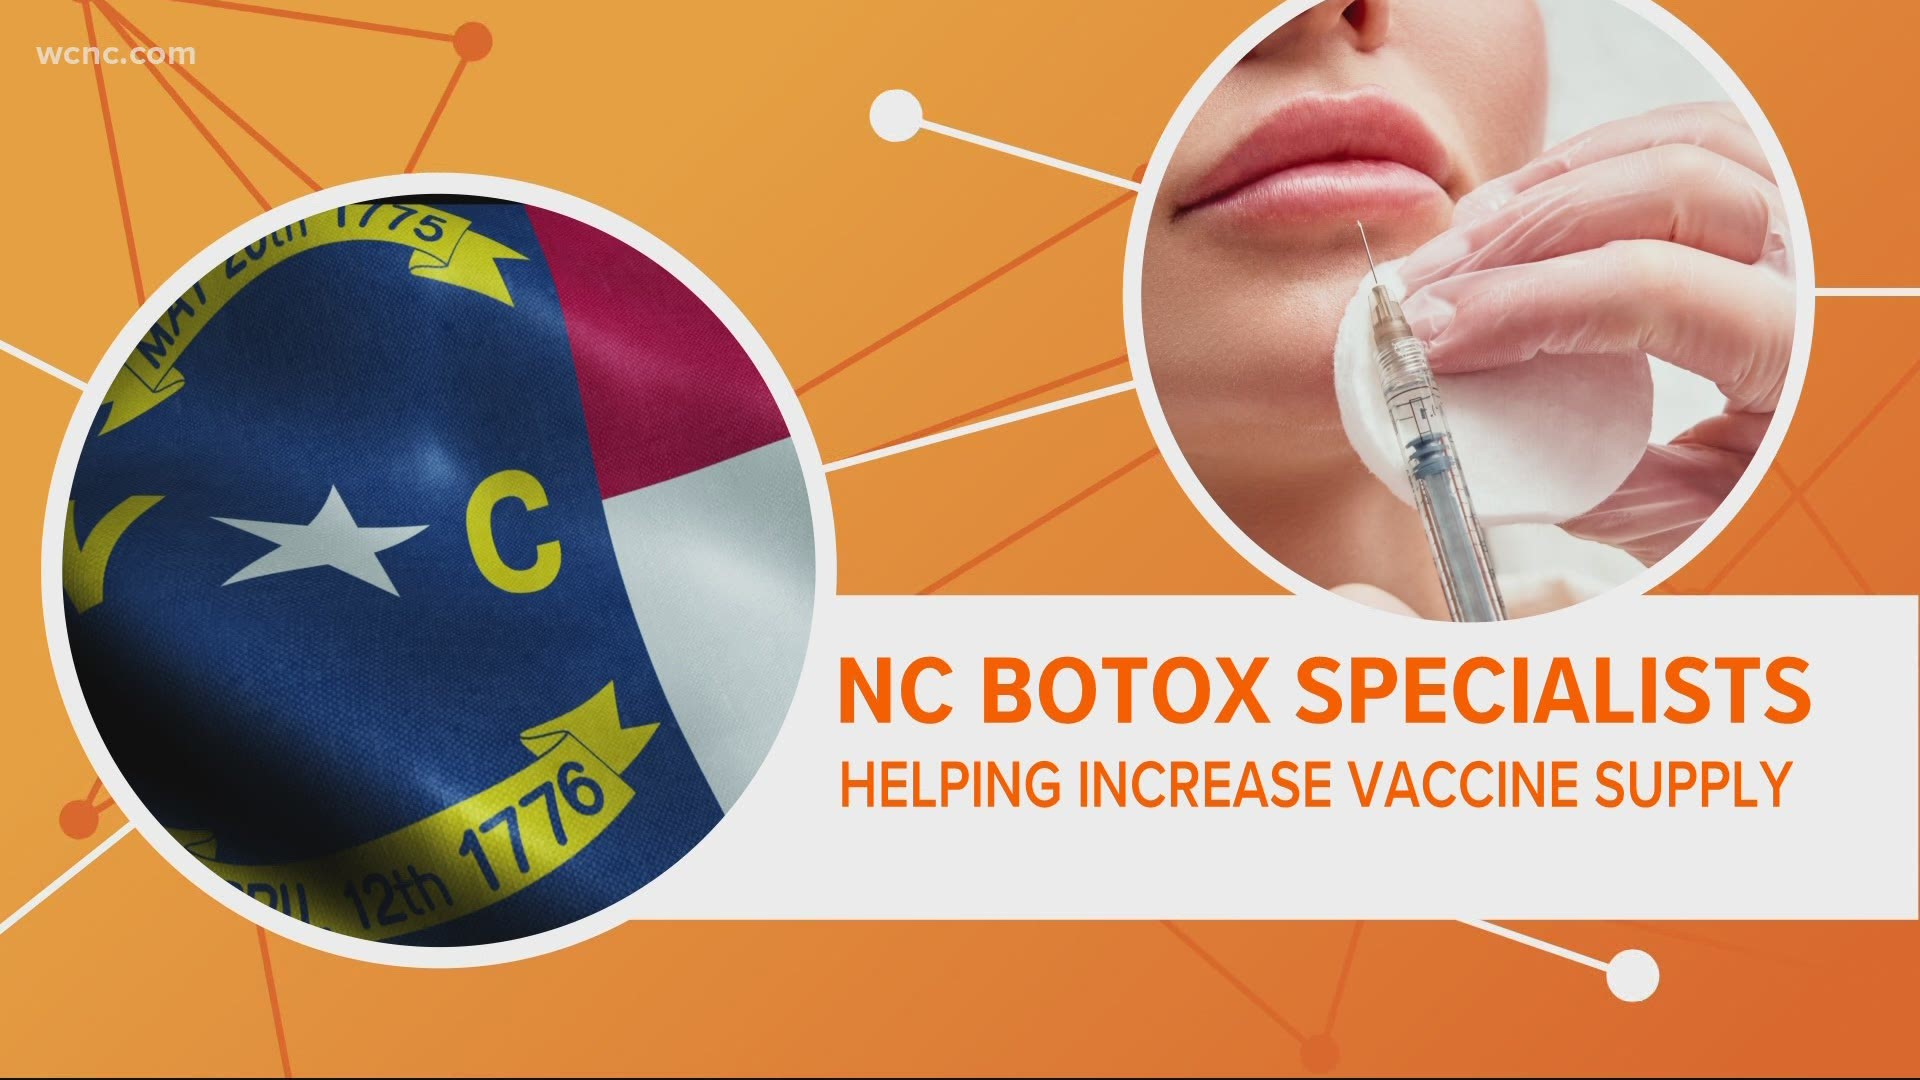 Botox and COVID-19 vaccines aren't related, but one Charlotte vaccine provider is changing that by tapping into those cosmetic surgery skills.